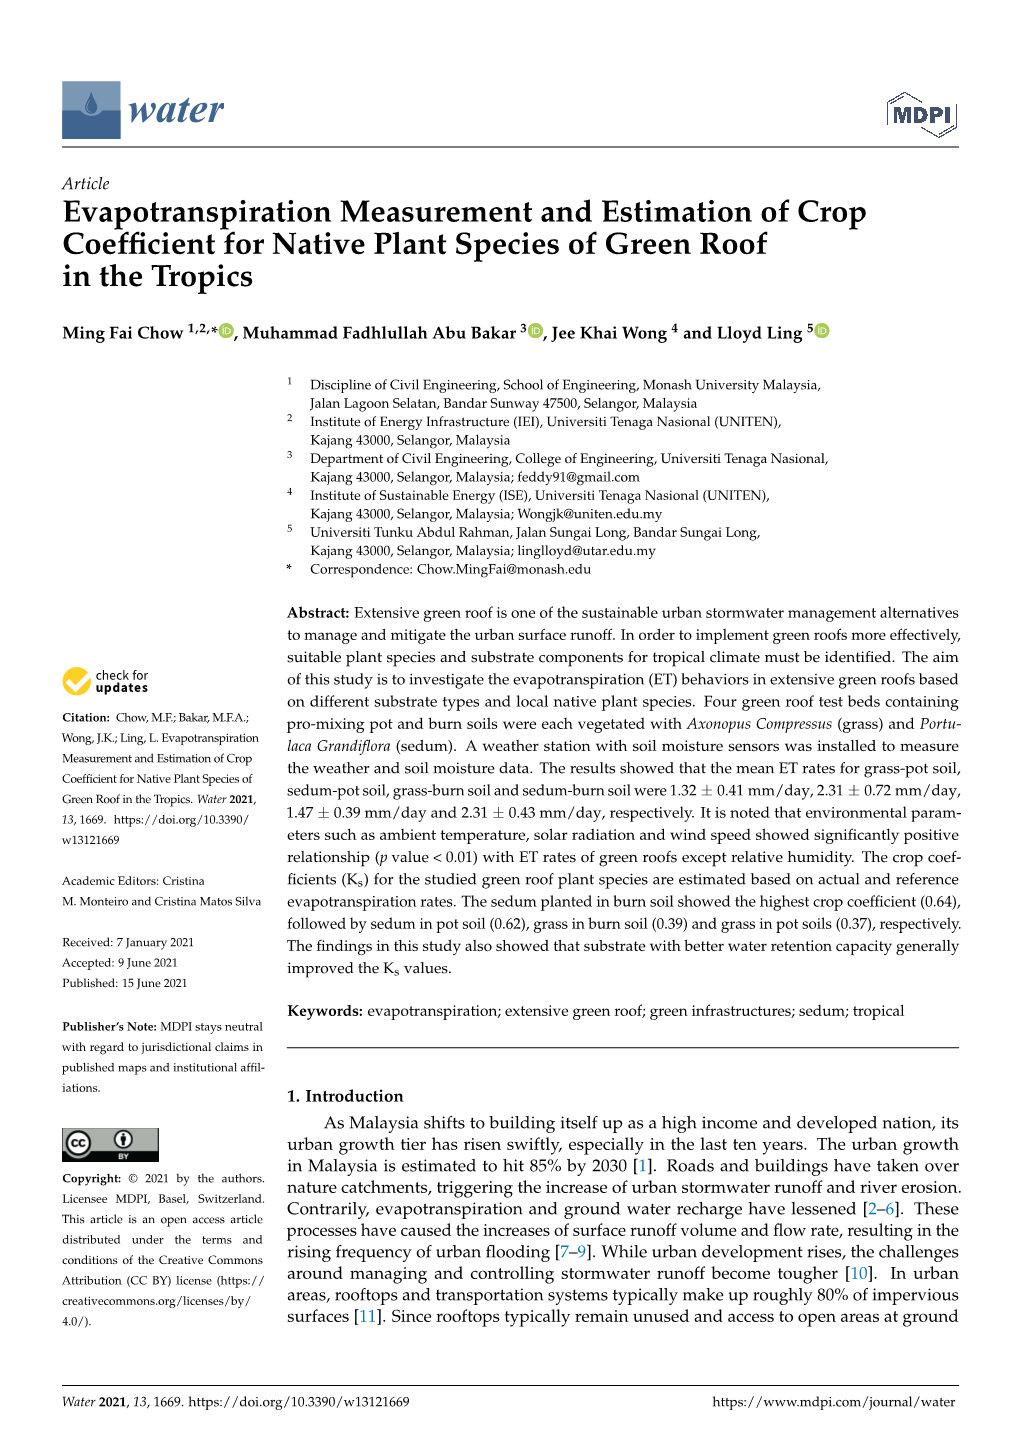 Evapotranspiration Measurement and Estimation of Crop Coefficient for Native Plant Species of Green Roof in the Tropics